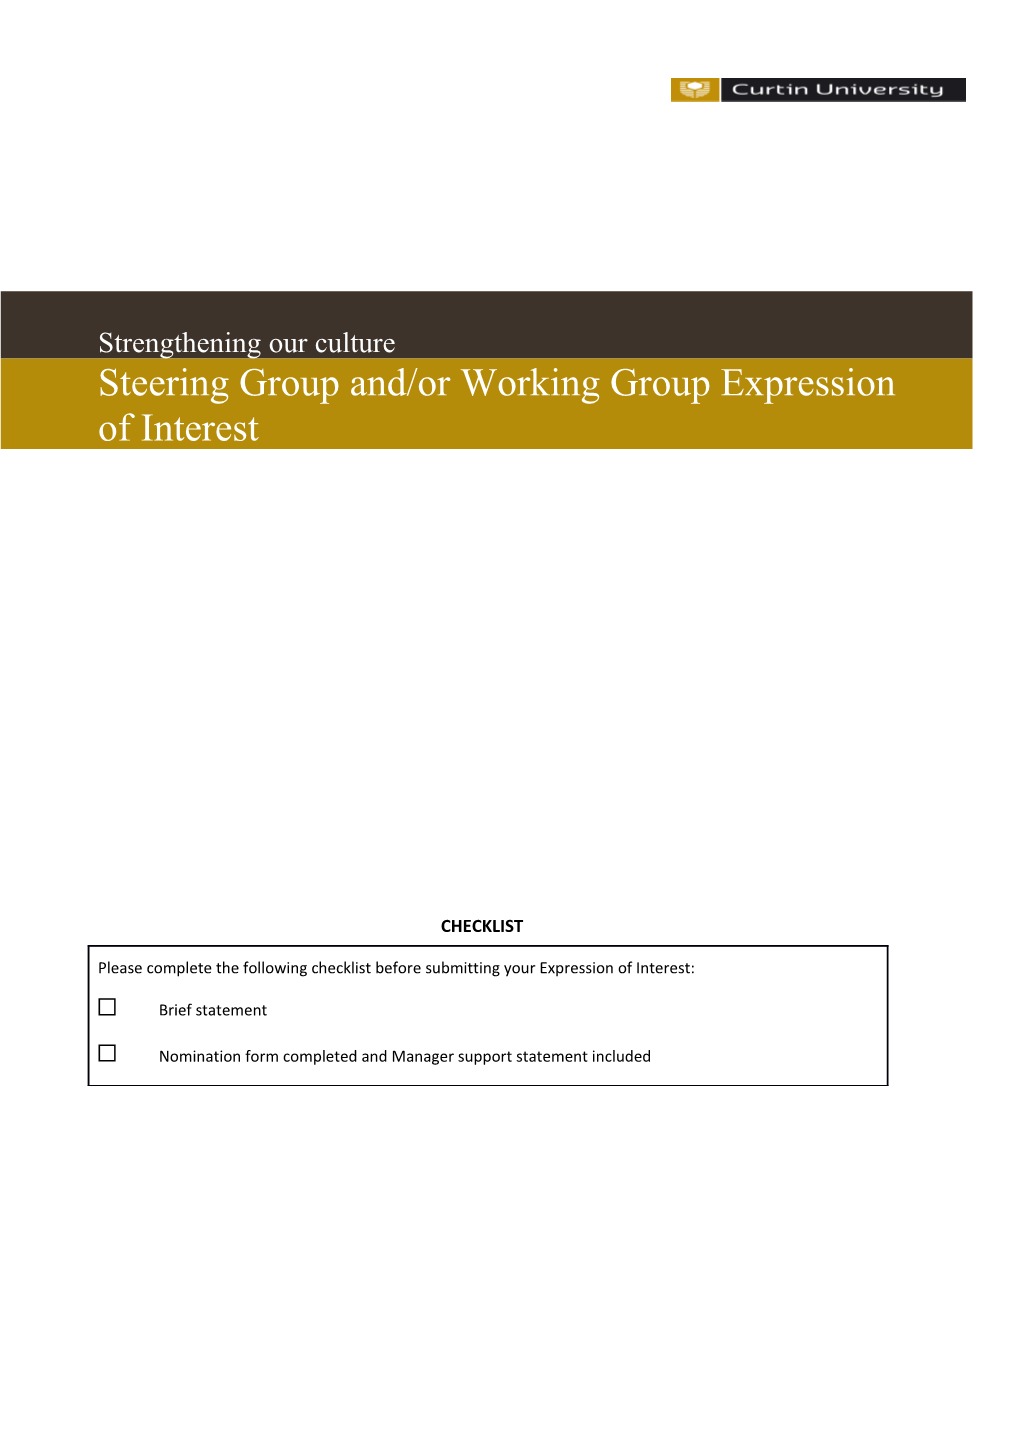 Steering Group And/Or Working Group Expression of Interest